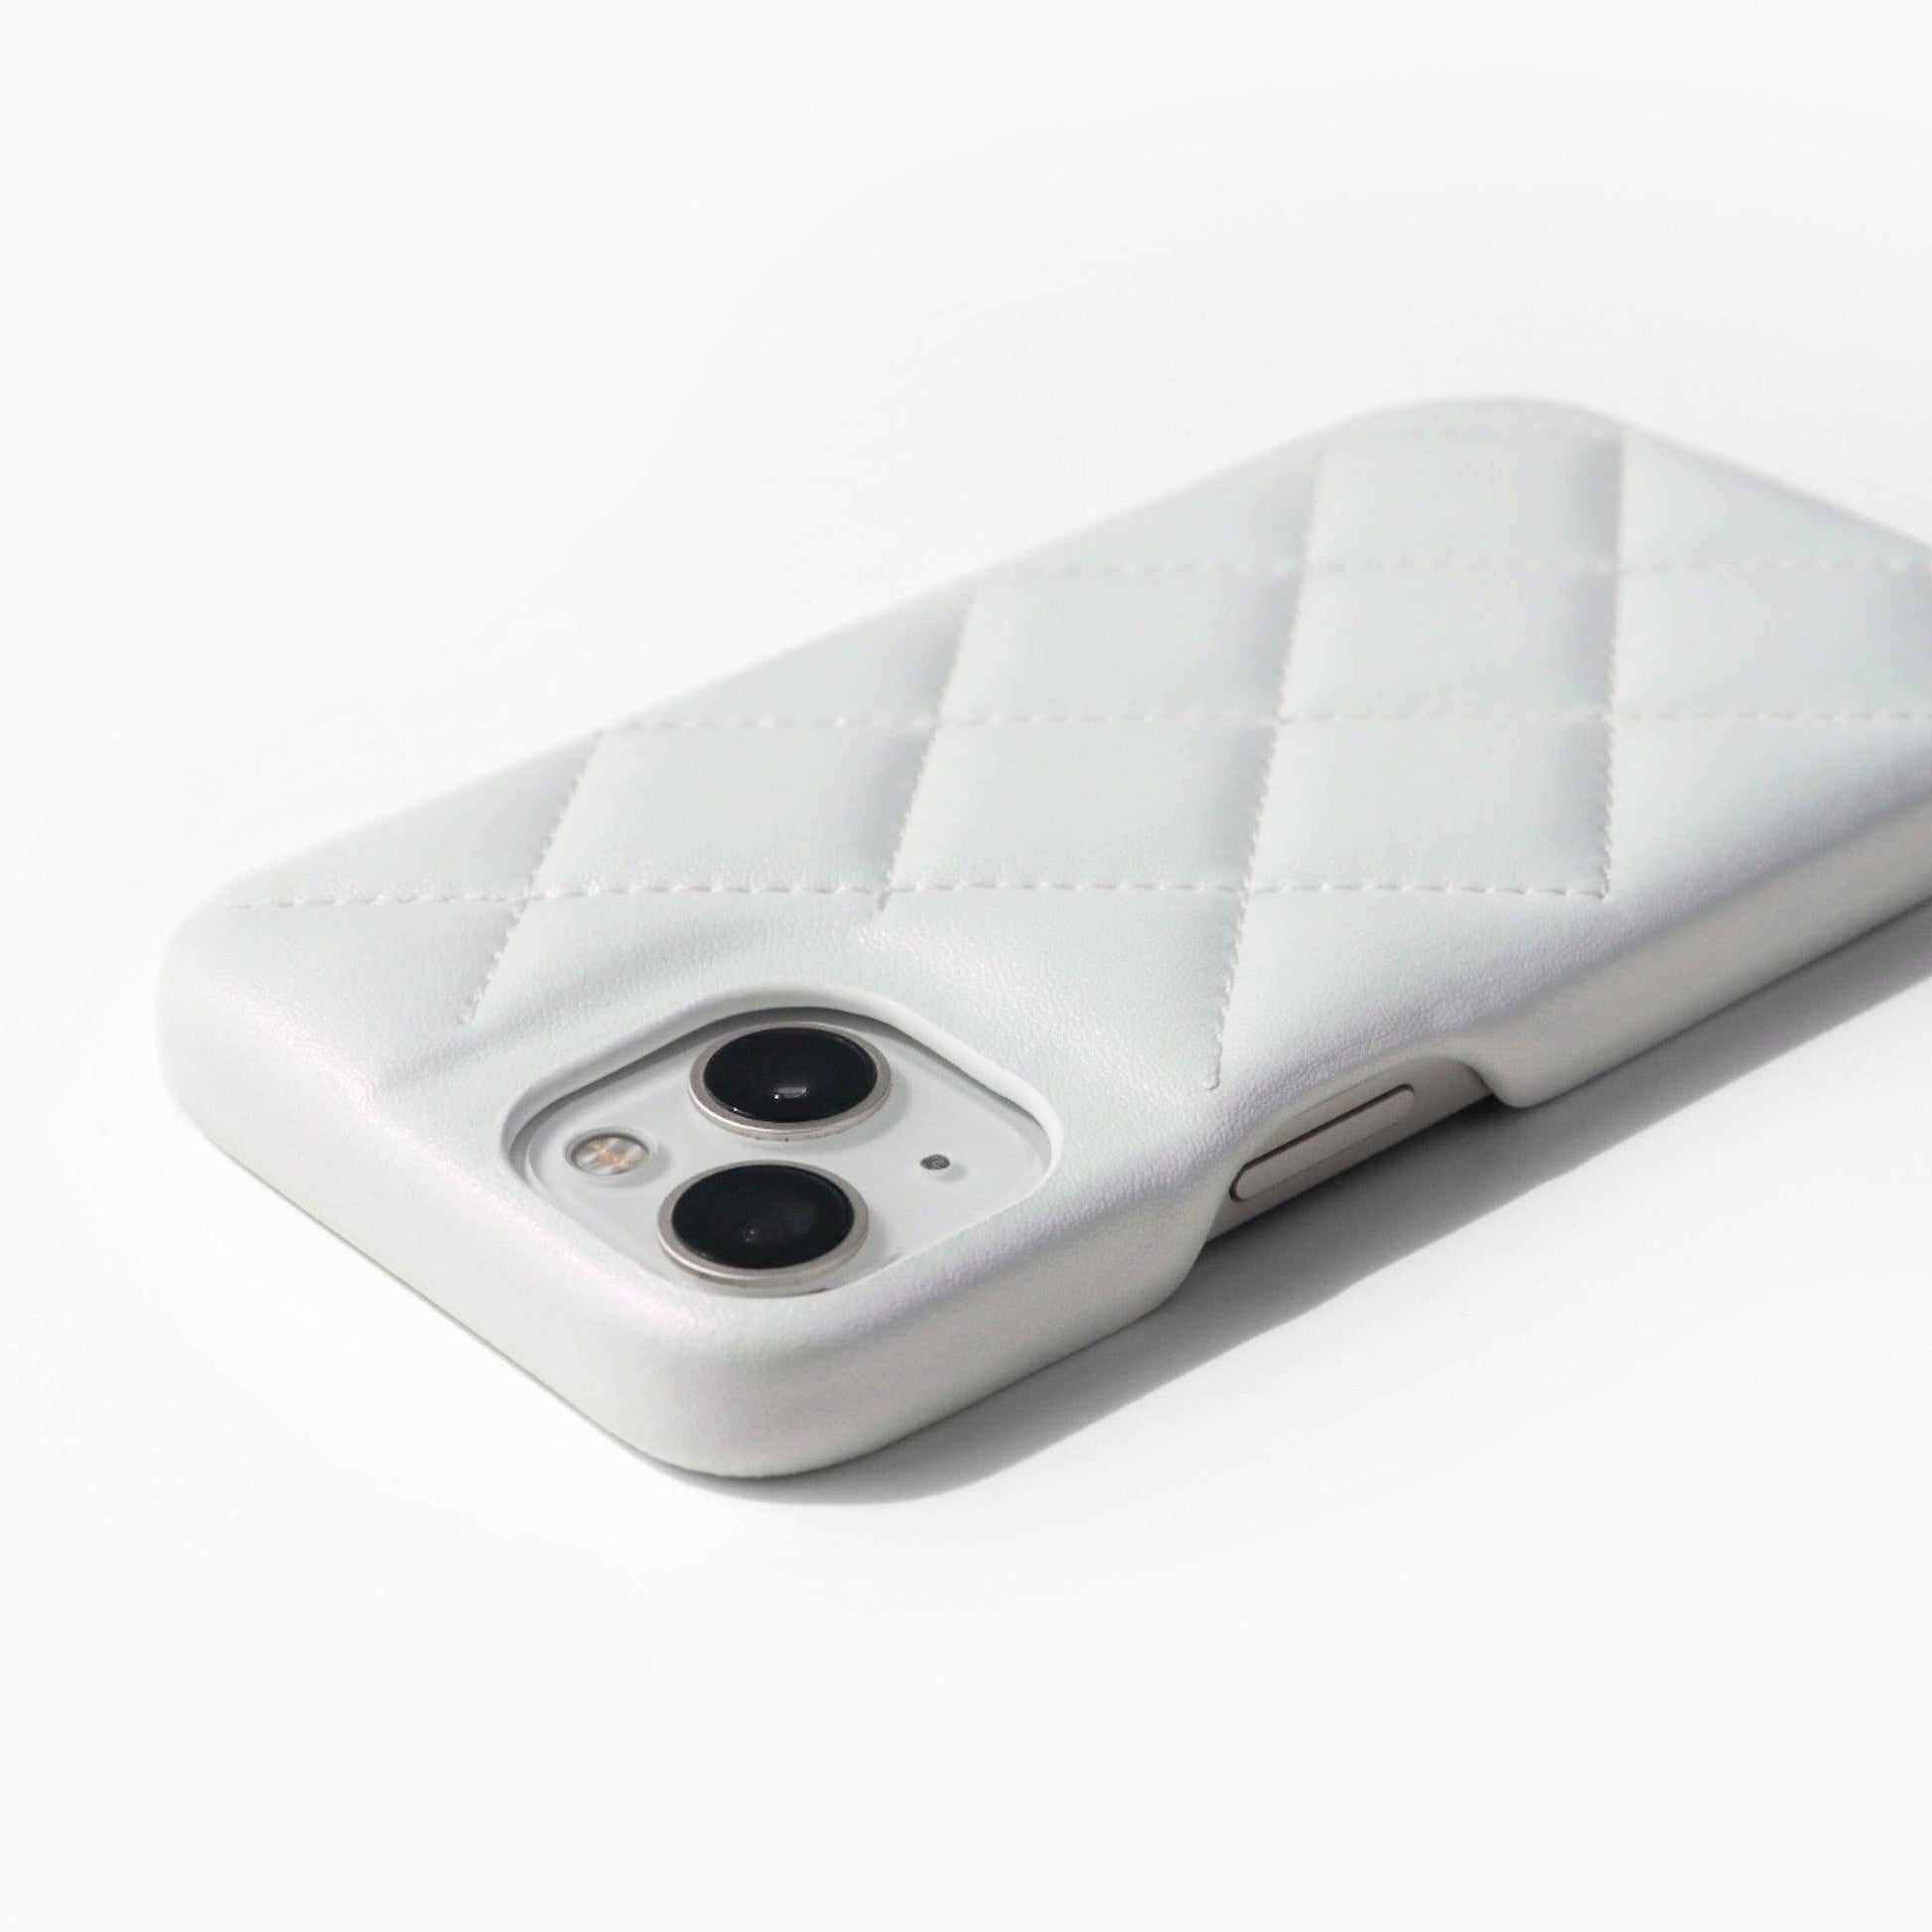 iPhone Quilt Case - Gloss White